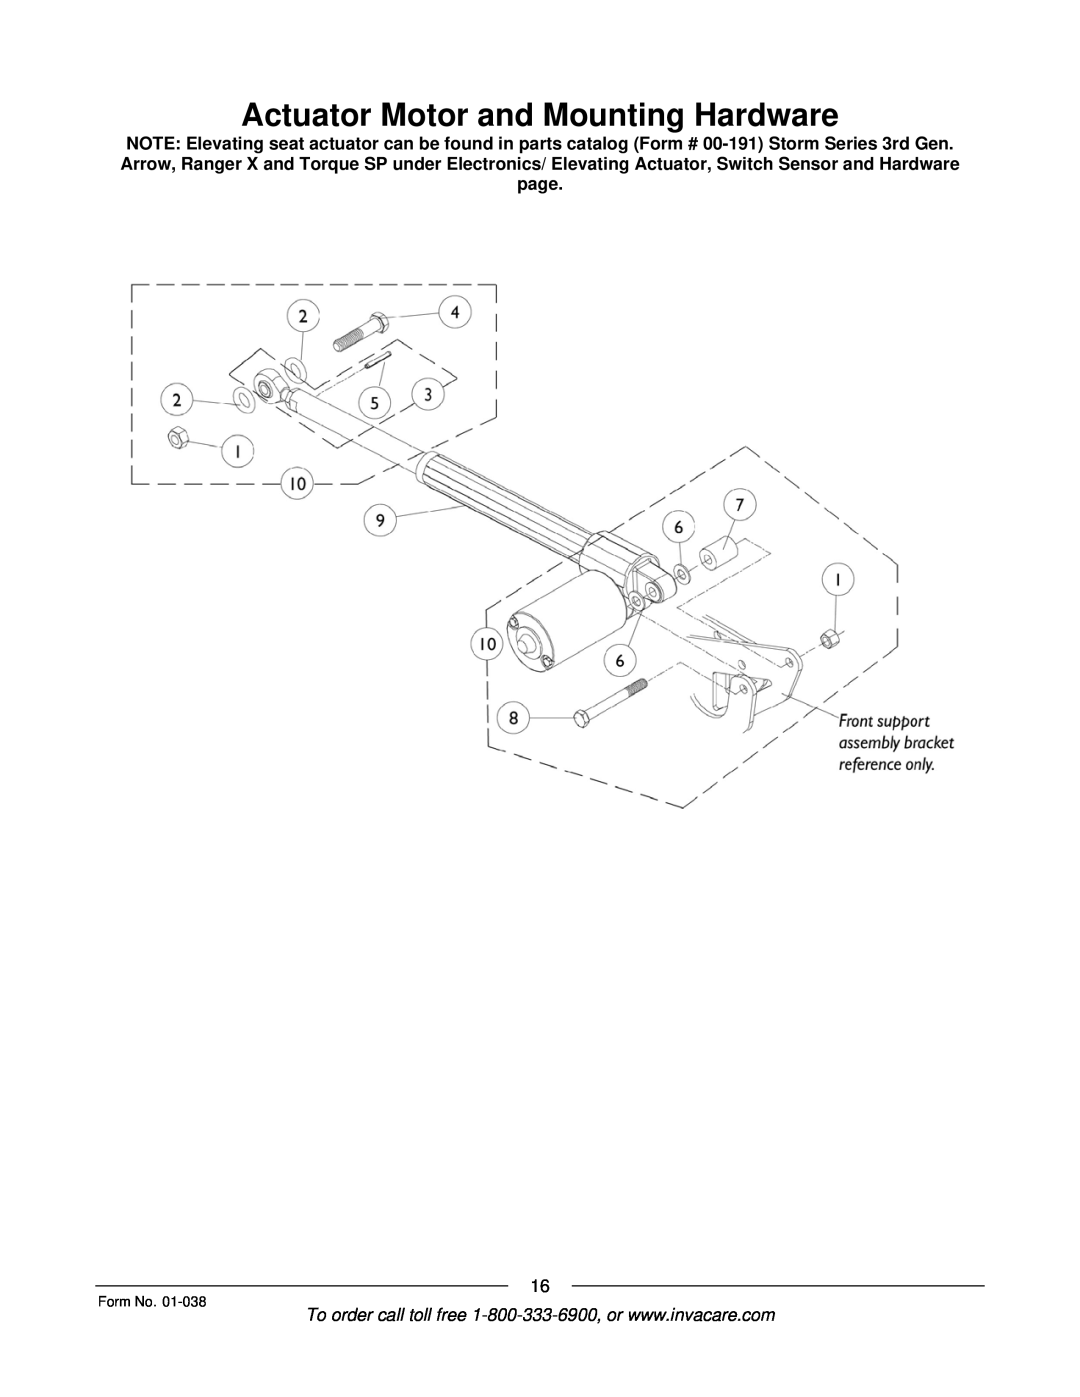 Invacare ESS-PTO, PTO-STM manual Actuator Motor and Mounting Hardware, Form No 